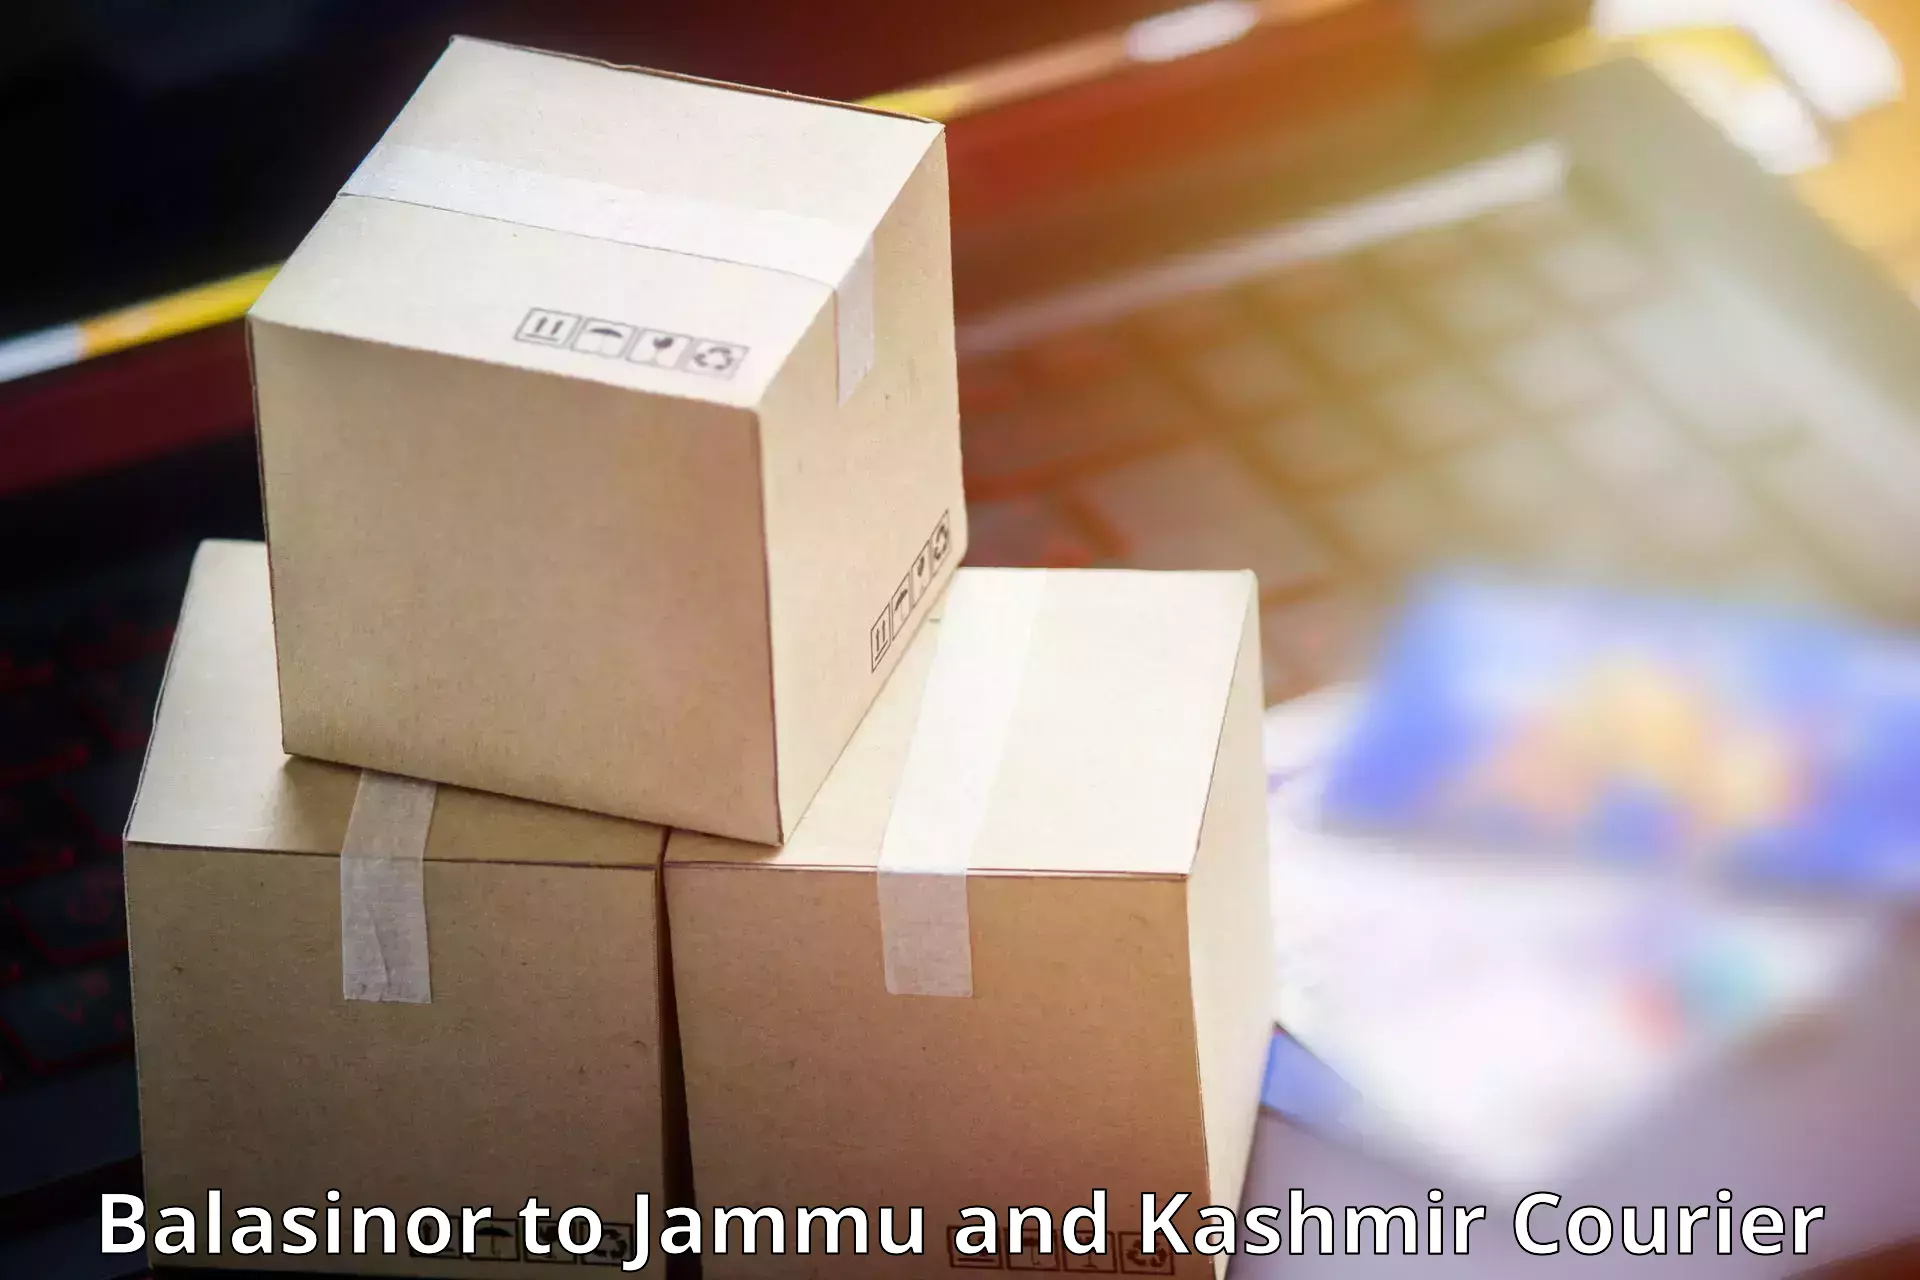 Express delivery capabilities Balasinor to Pulwama